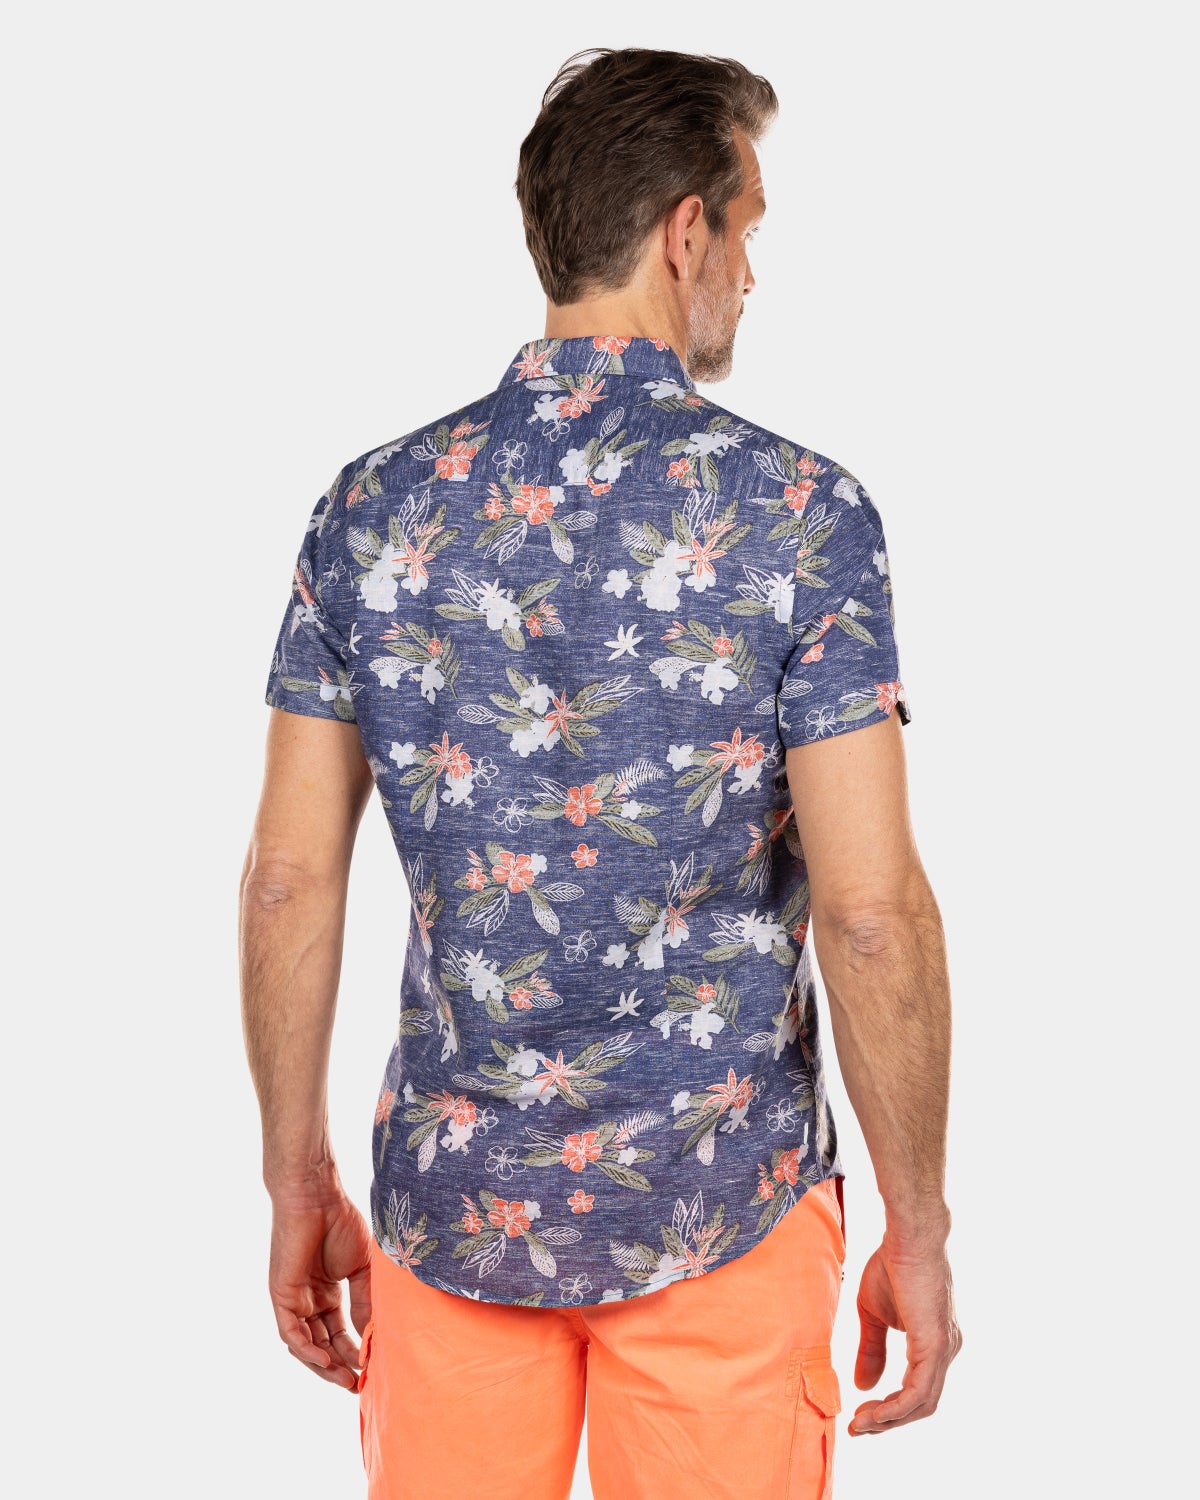 Floral shirt with short sleeves - Dusk Navy